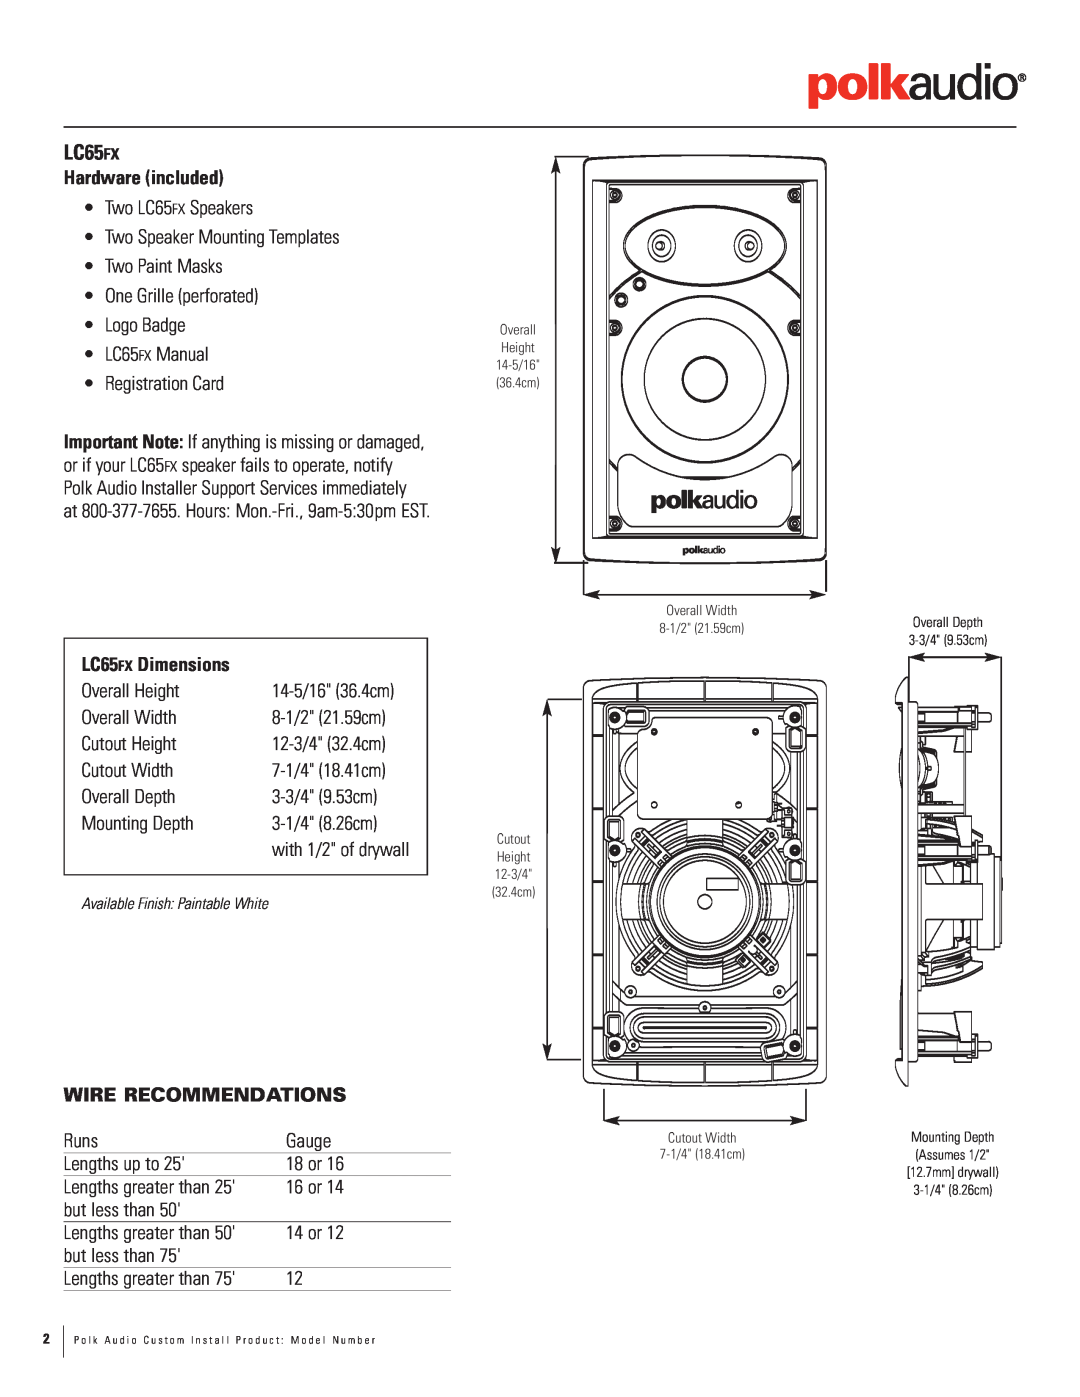 Polk Audio LC80fx dimensions Hardware included, LC65FX Dimensions, Wire Recommendations 